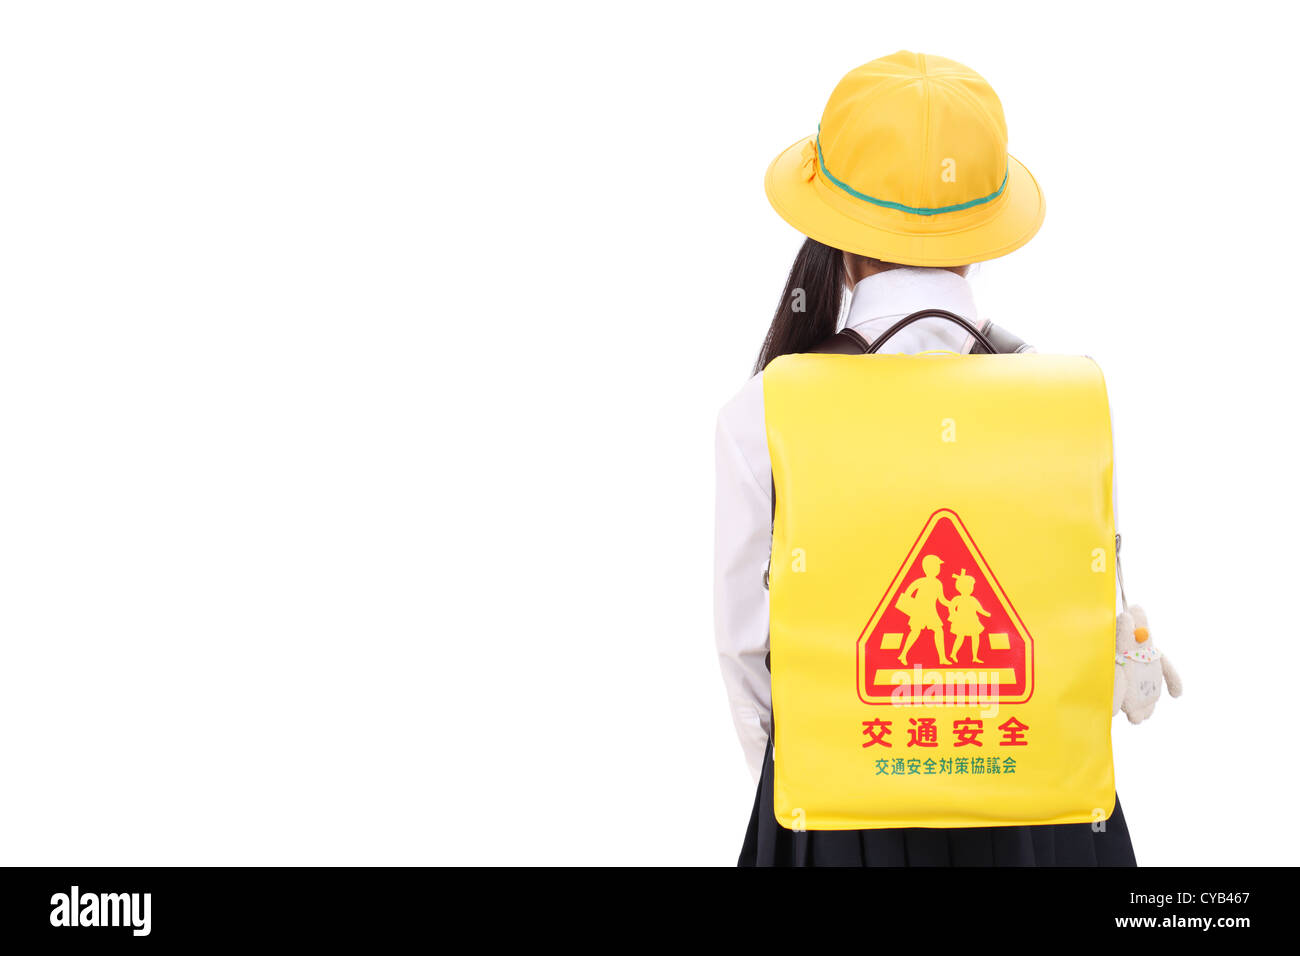 Rear view of little asian schoolgirl standing with schoolbag Stock Photo